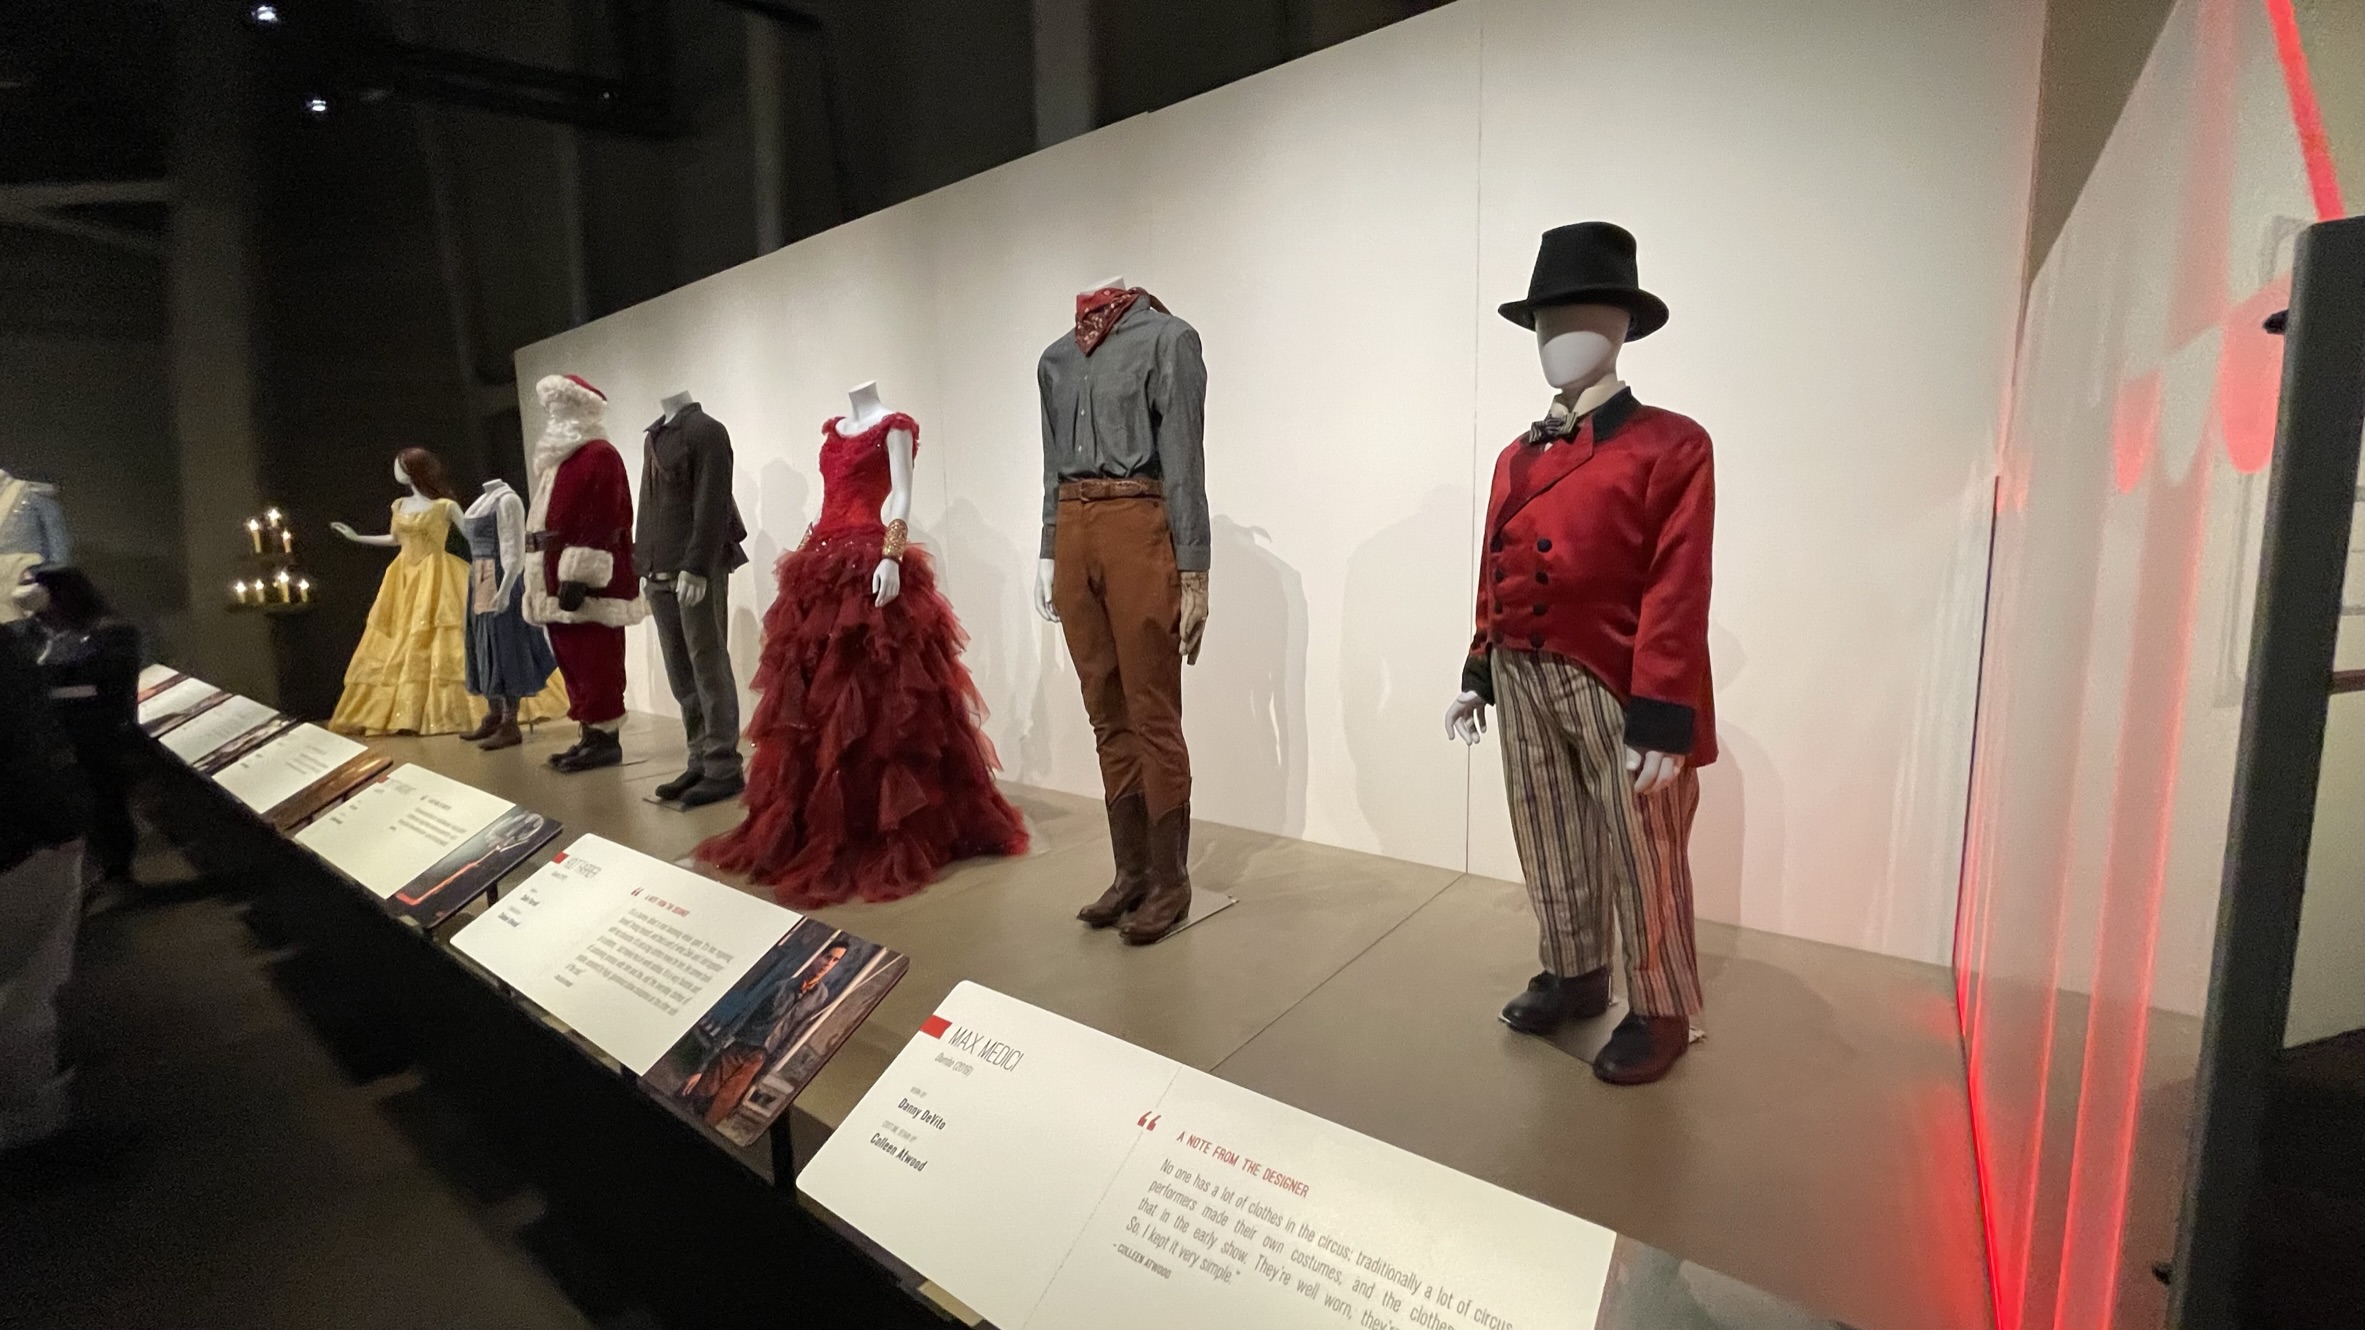 Disney Archives Disney Heroes & Villains: The Art of the Disney Costume 'Cinderella's Workshop Disney Costumes include Max Medici played by Danny Devito